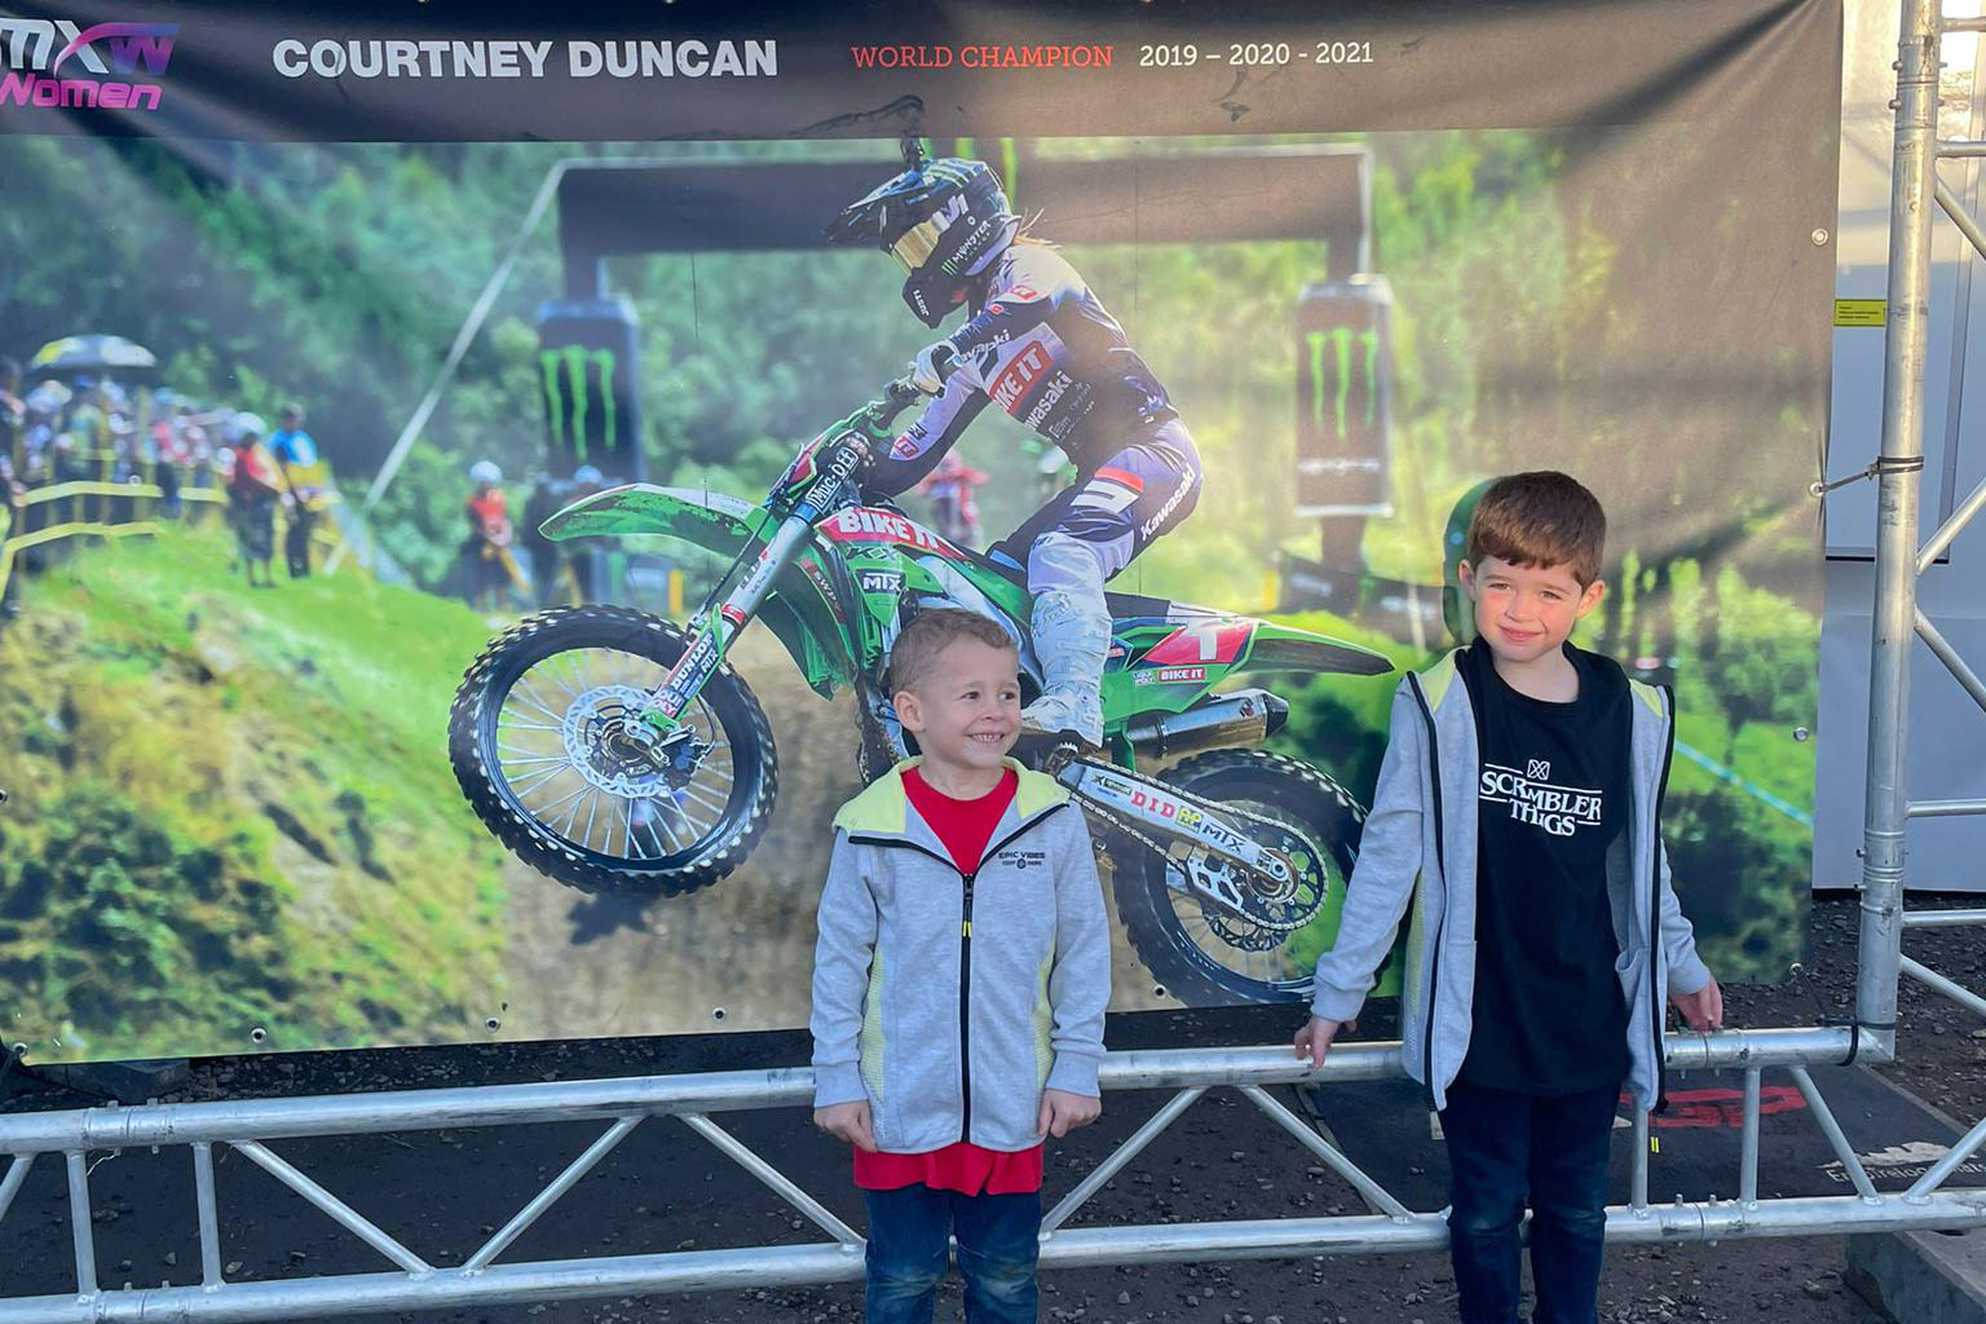 George and his brother, Charlie standing in front a large sign featuring Motocross rider, Courtney Duncan.